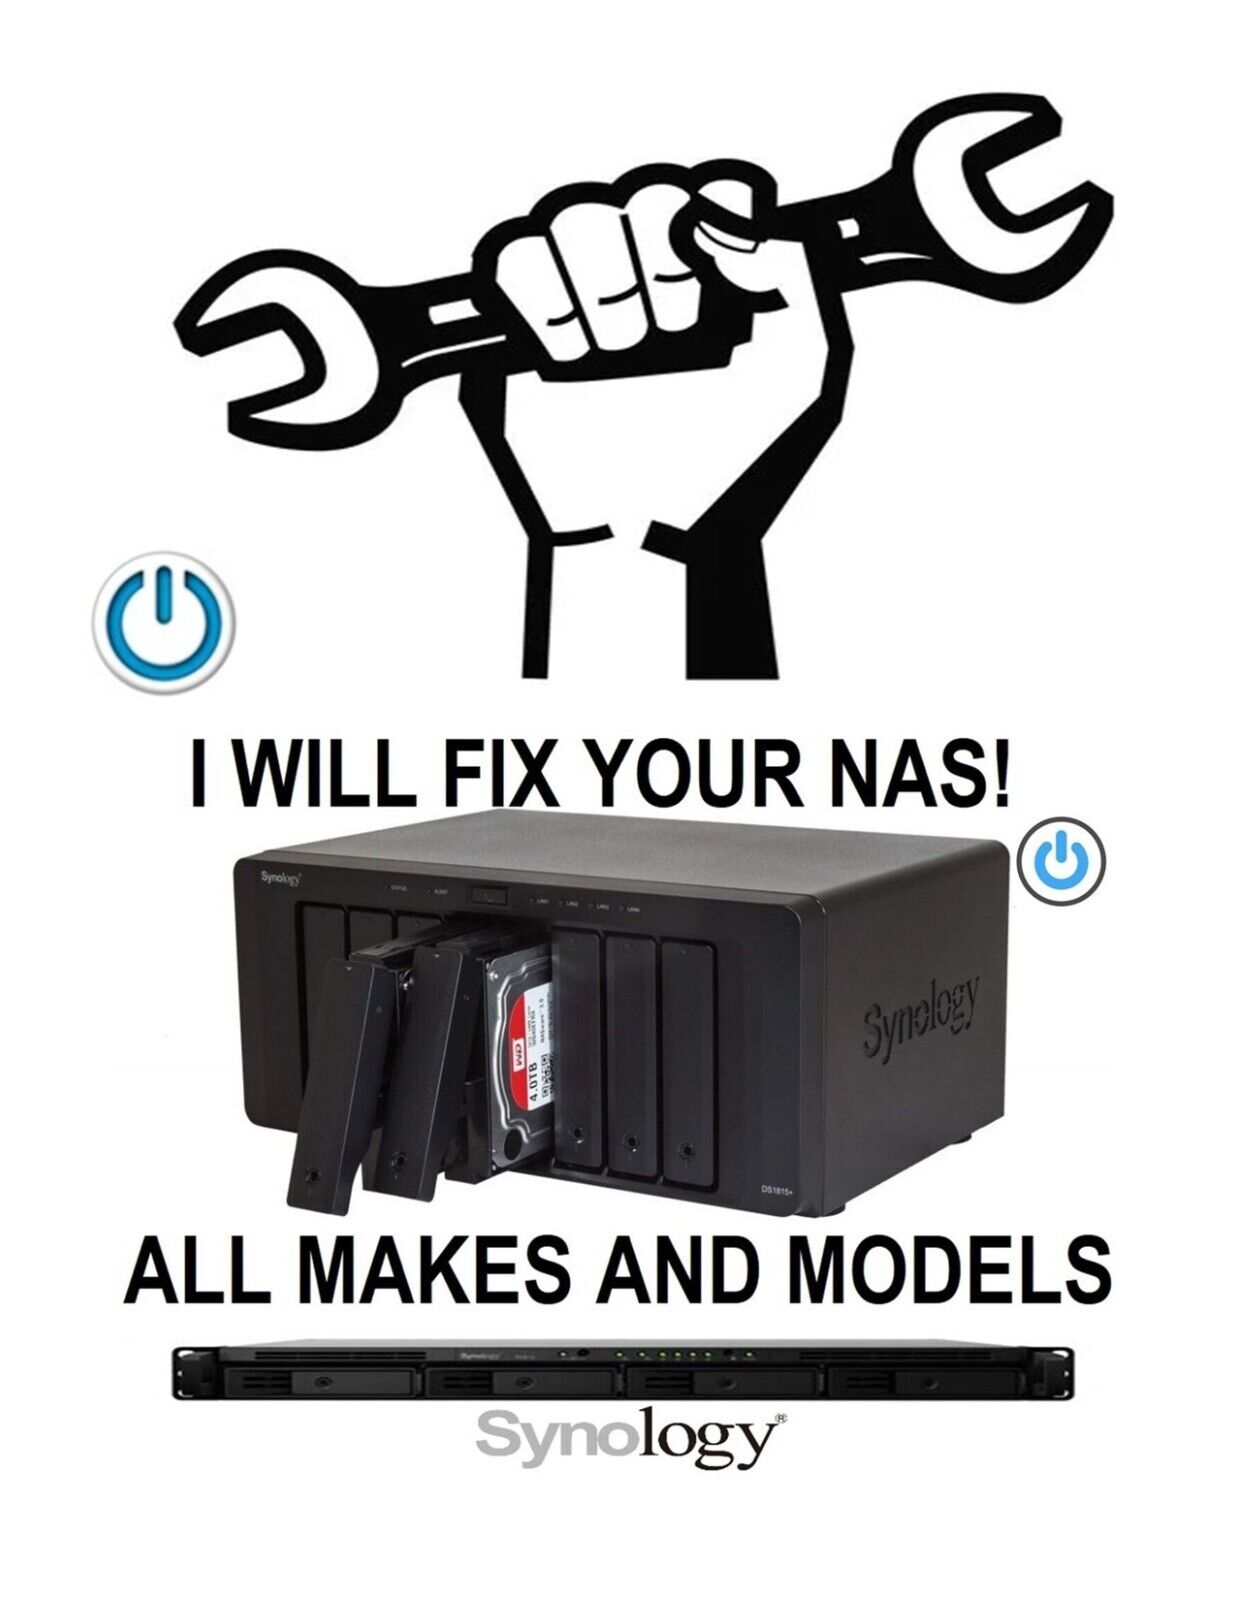 SYNOLOGY DS1815+ NAS SERVICE, MANY MODELS SUPPORTED LIFETIME WARRANTY*